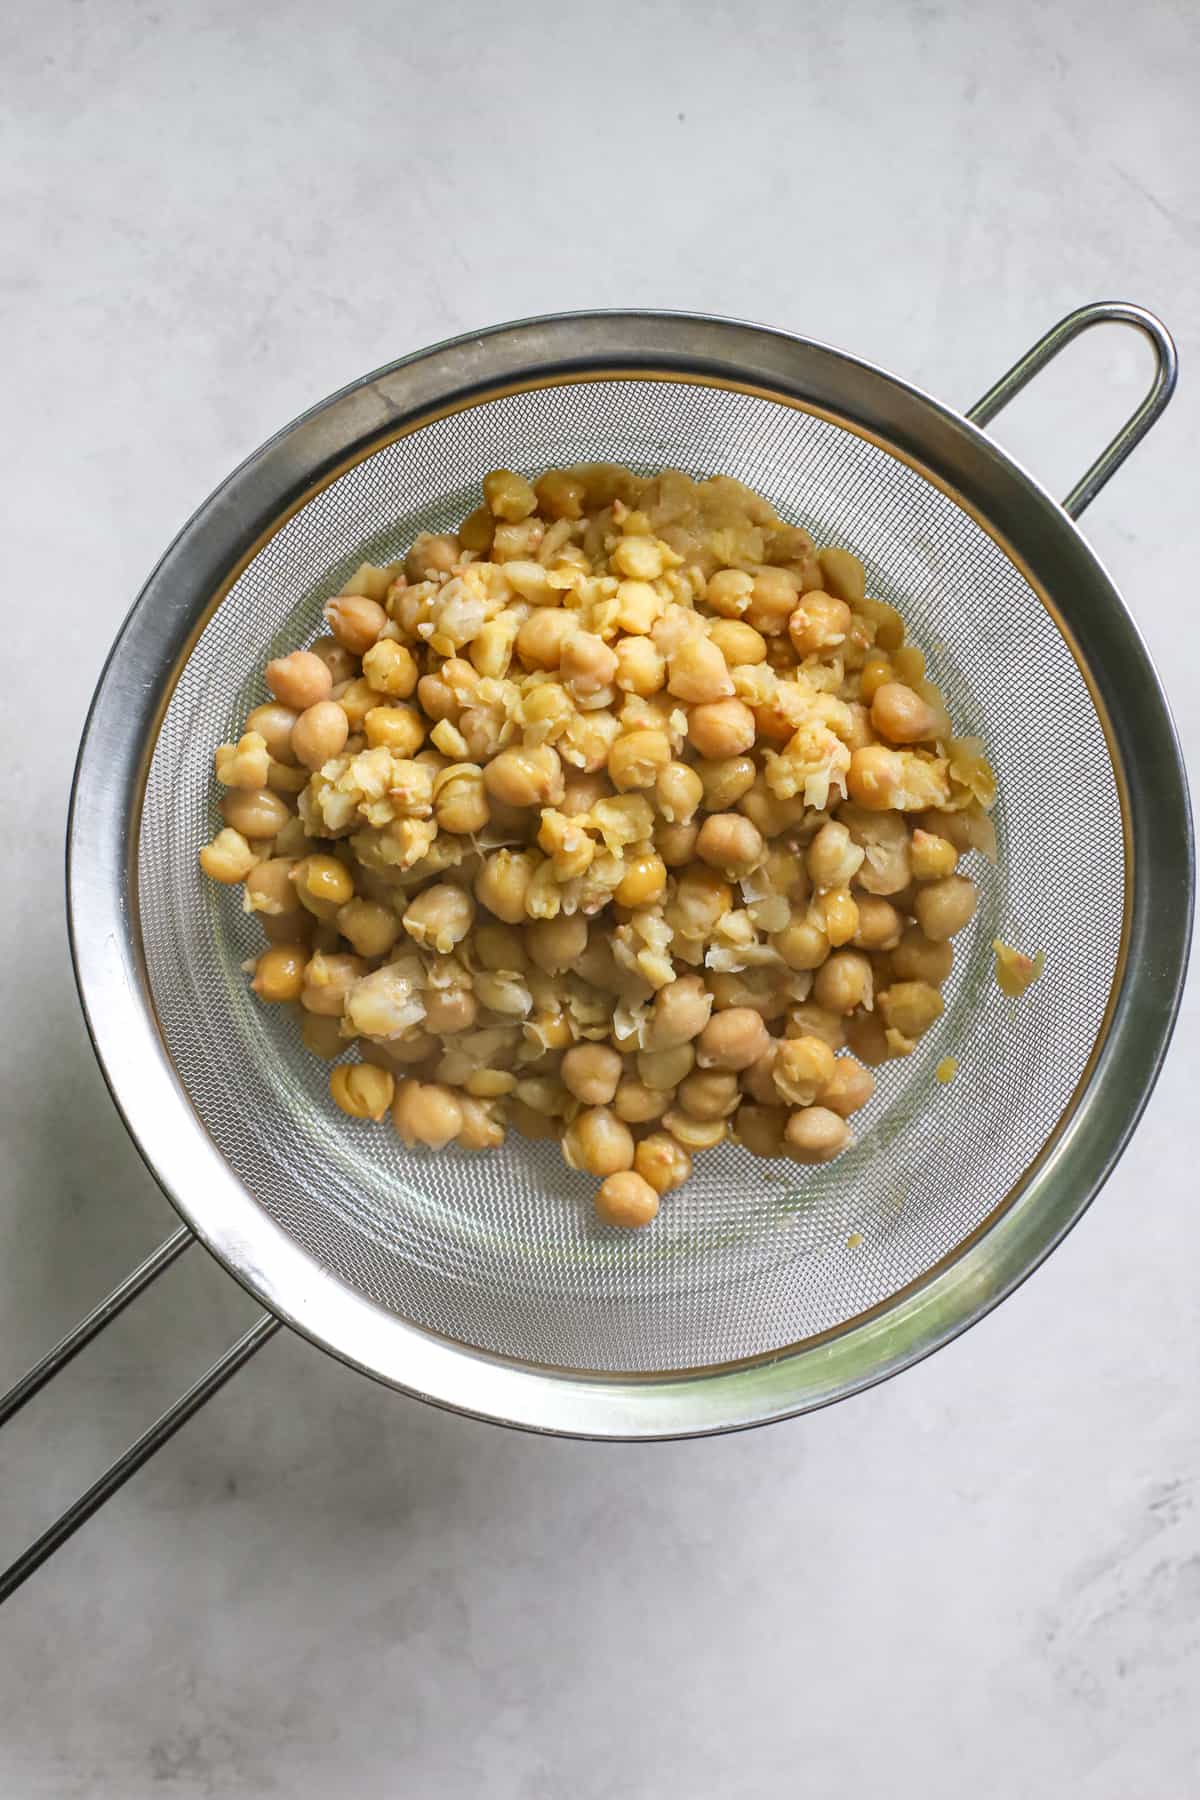 Cooked chickpeas draining in metal strainer